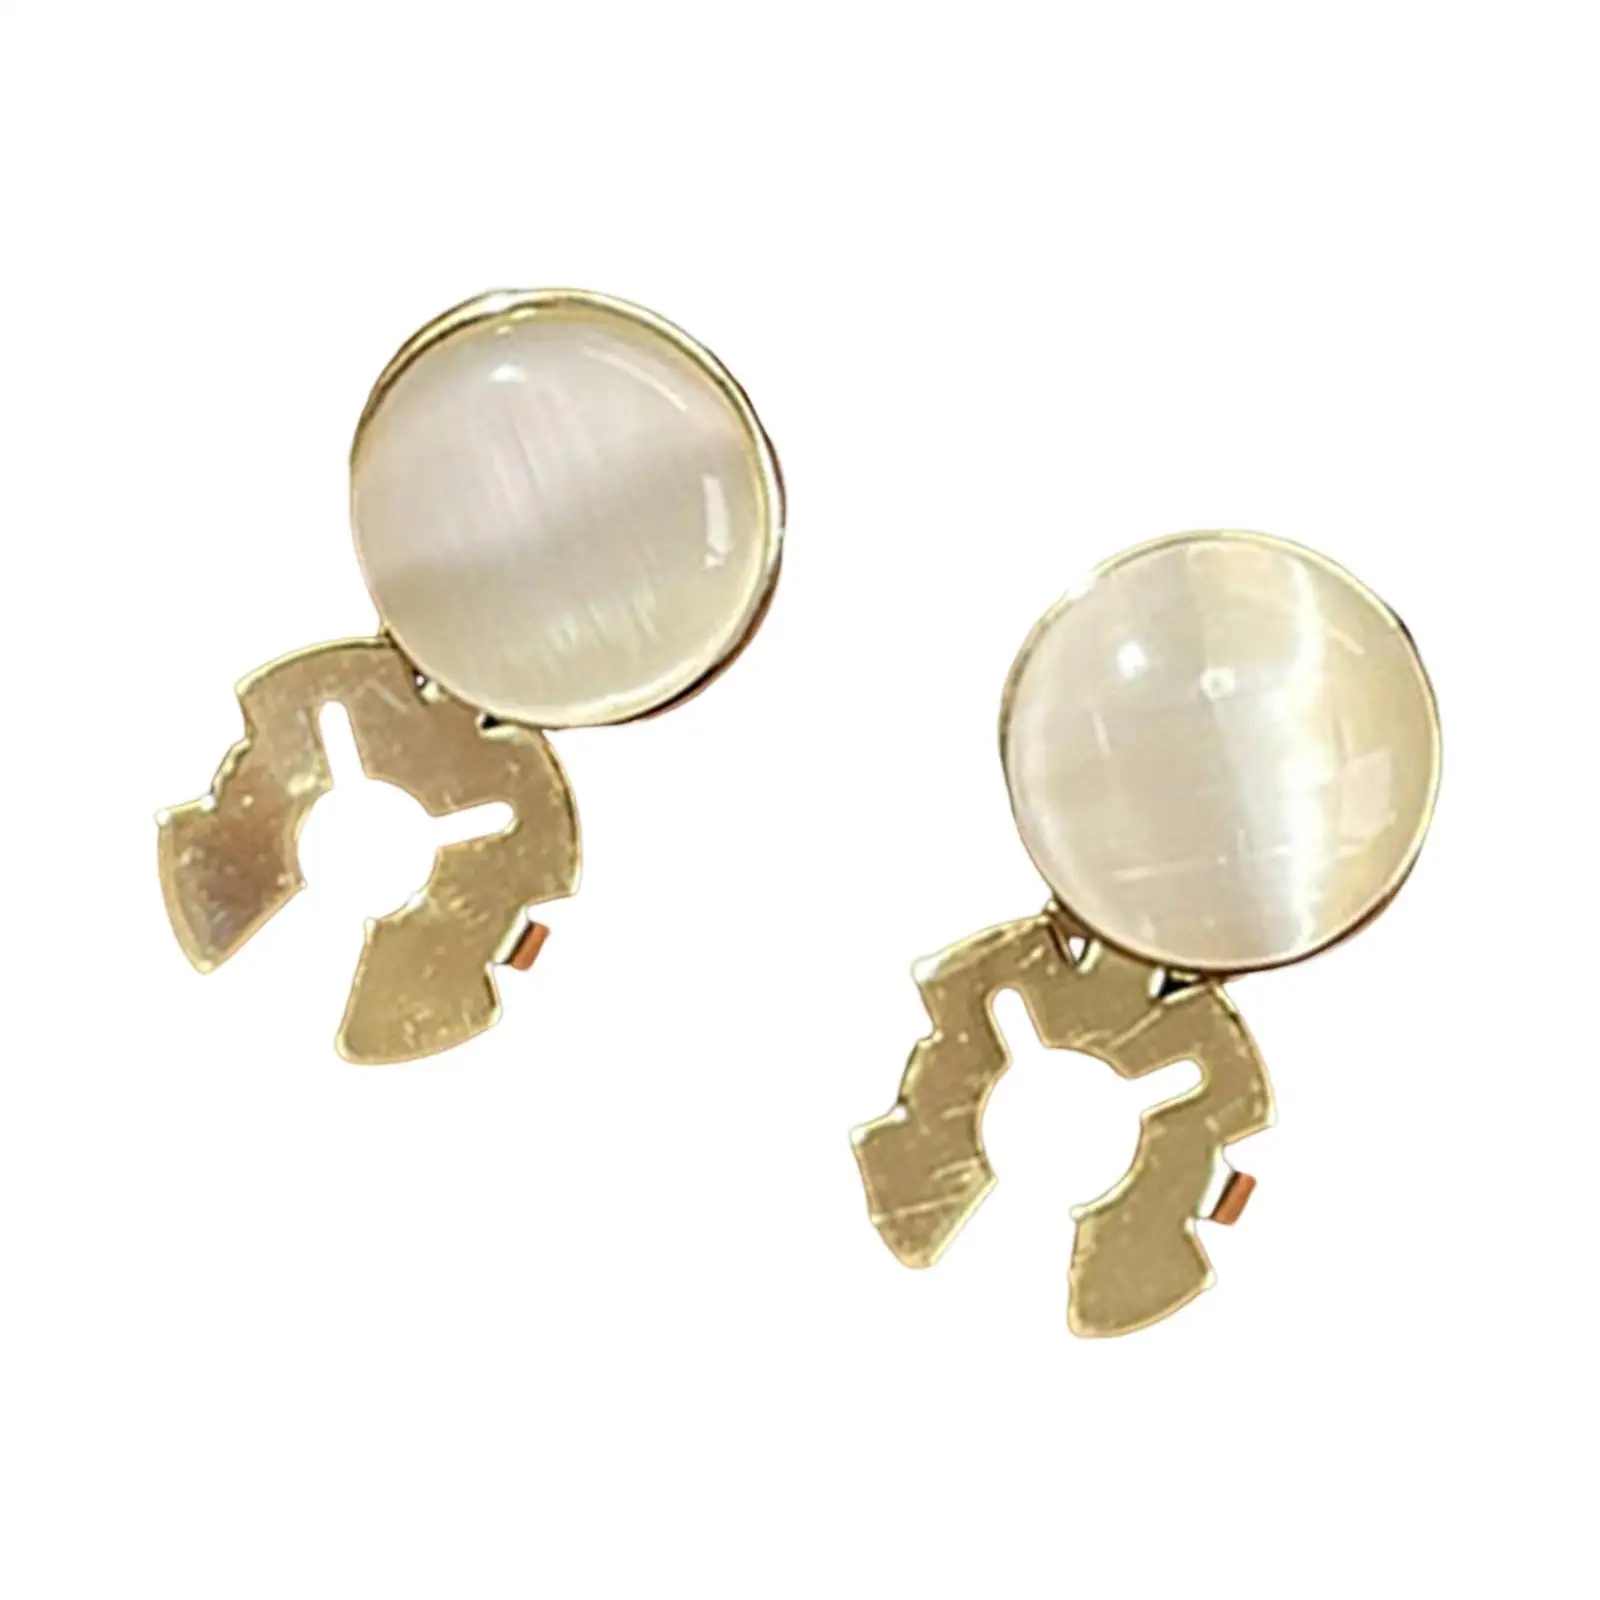 2x Fashion Suit Shirt Buttons Cufflink Circular Decorative Gold Formal Button Covers for Gift Festival Travel Holidays Business